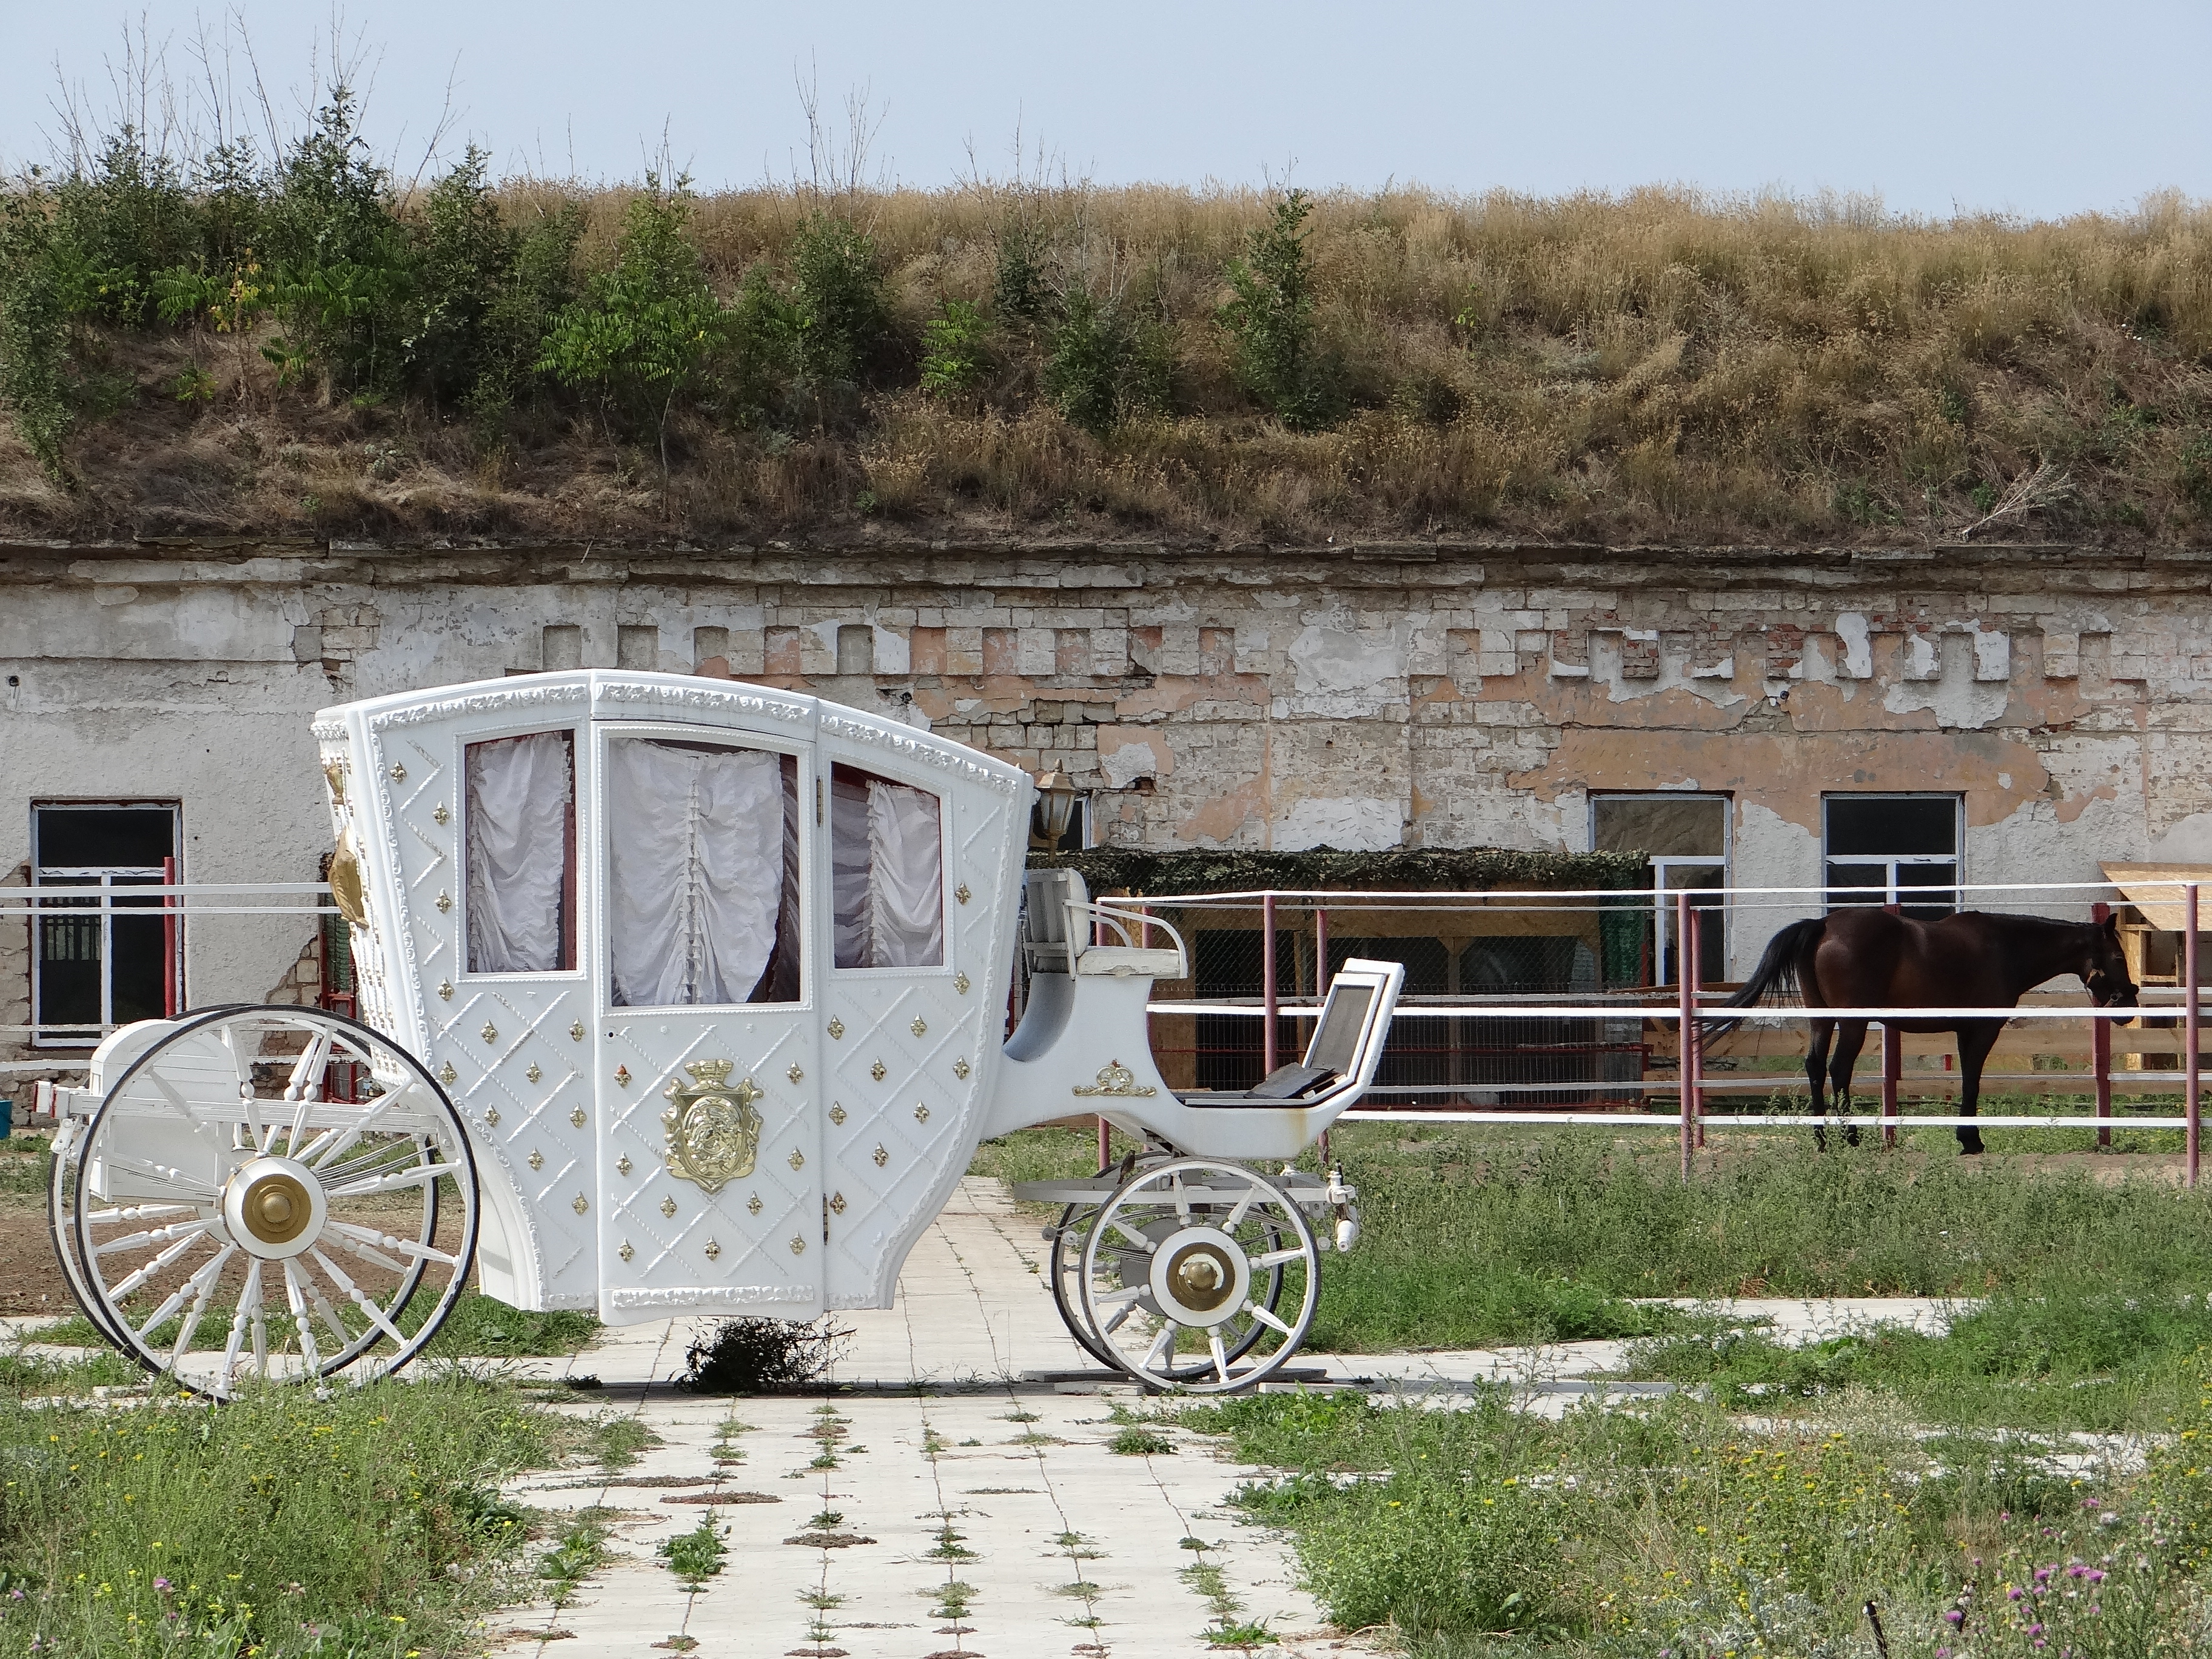 Horse and Carriage - Bendery Fortress - Bendery - Transnistria (36032560843)